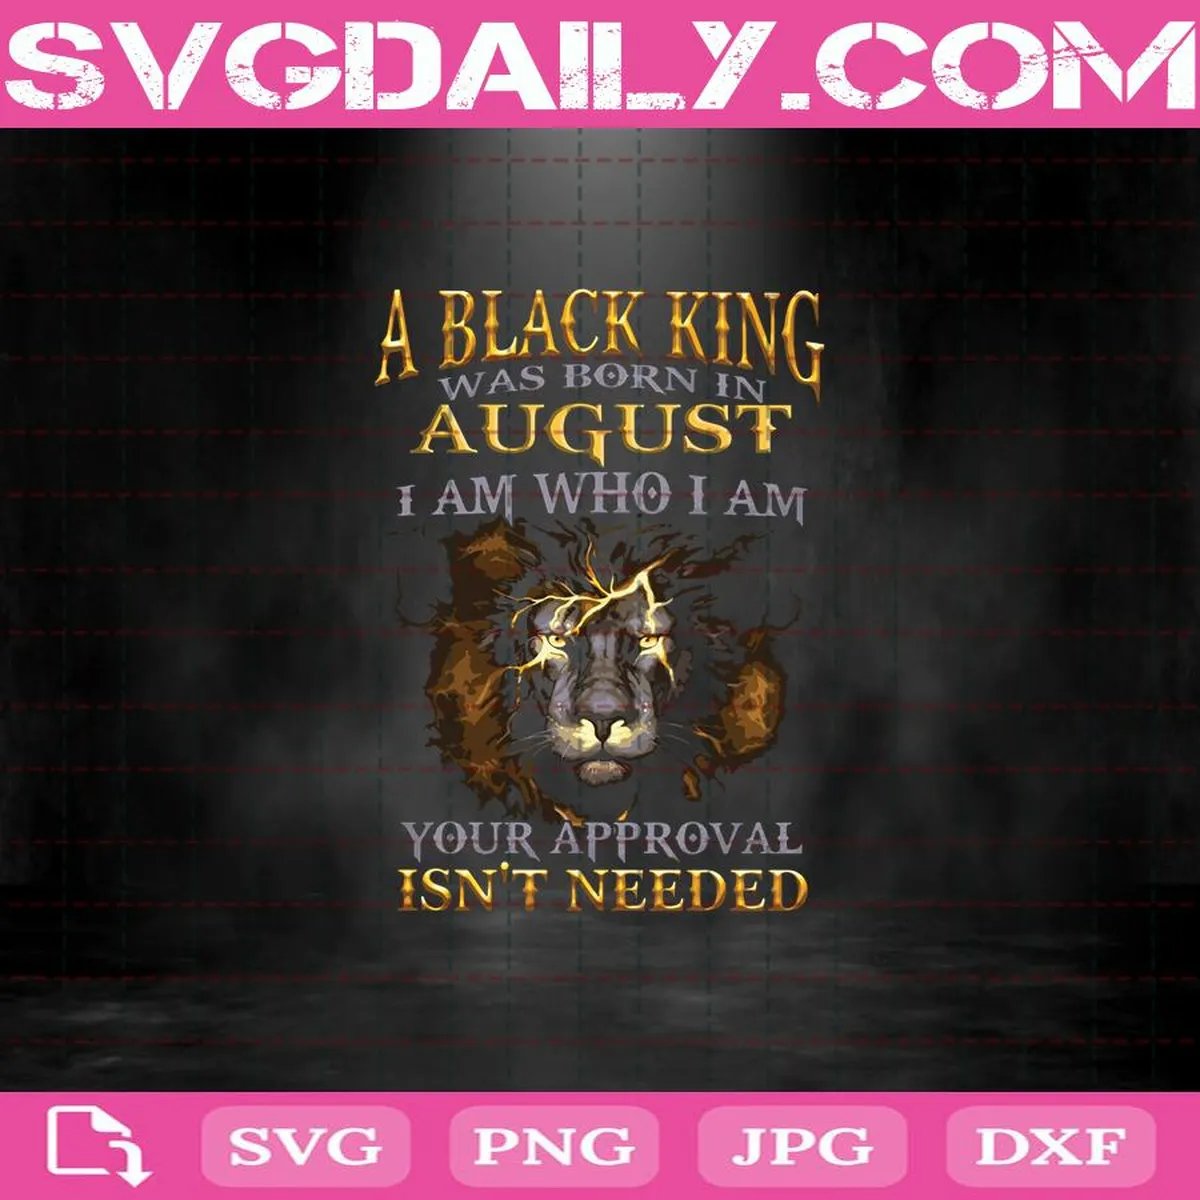 A Black King Was Born In August I Am Who I Am Your Approval Isn't Needed Svg, Black King Svg, August Svg, August King Svg, Born In August Svg, Birthday Svg